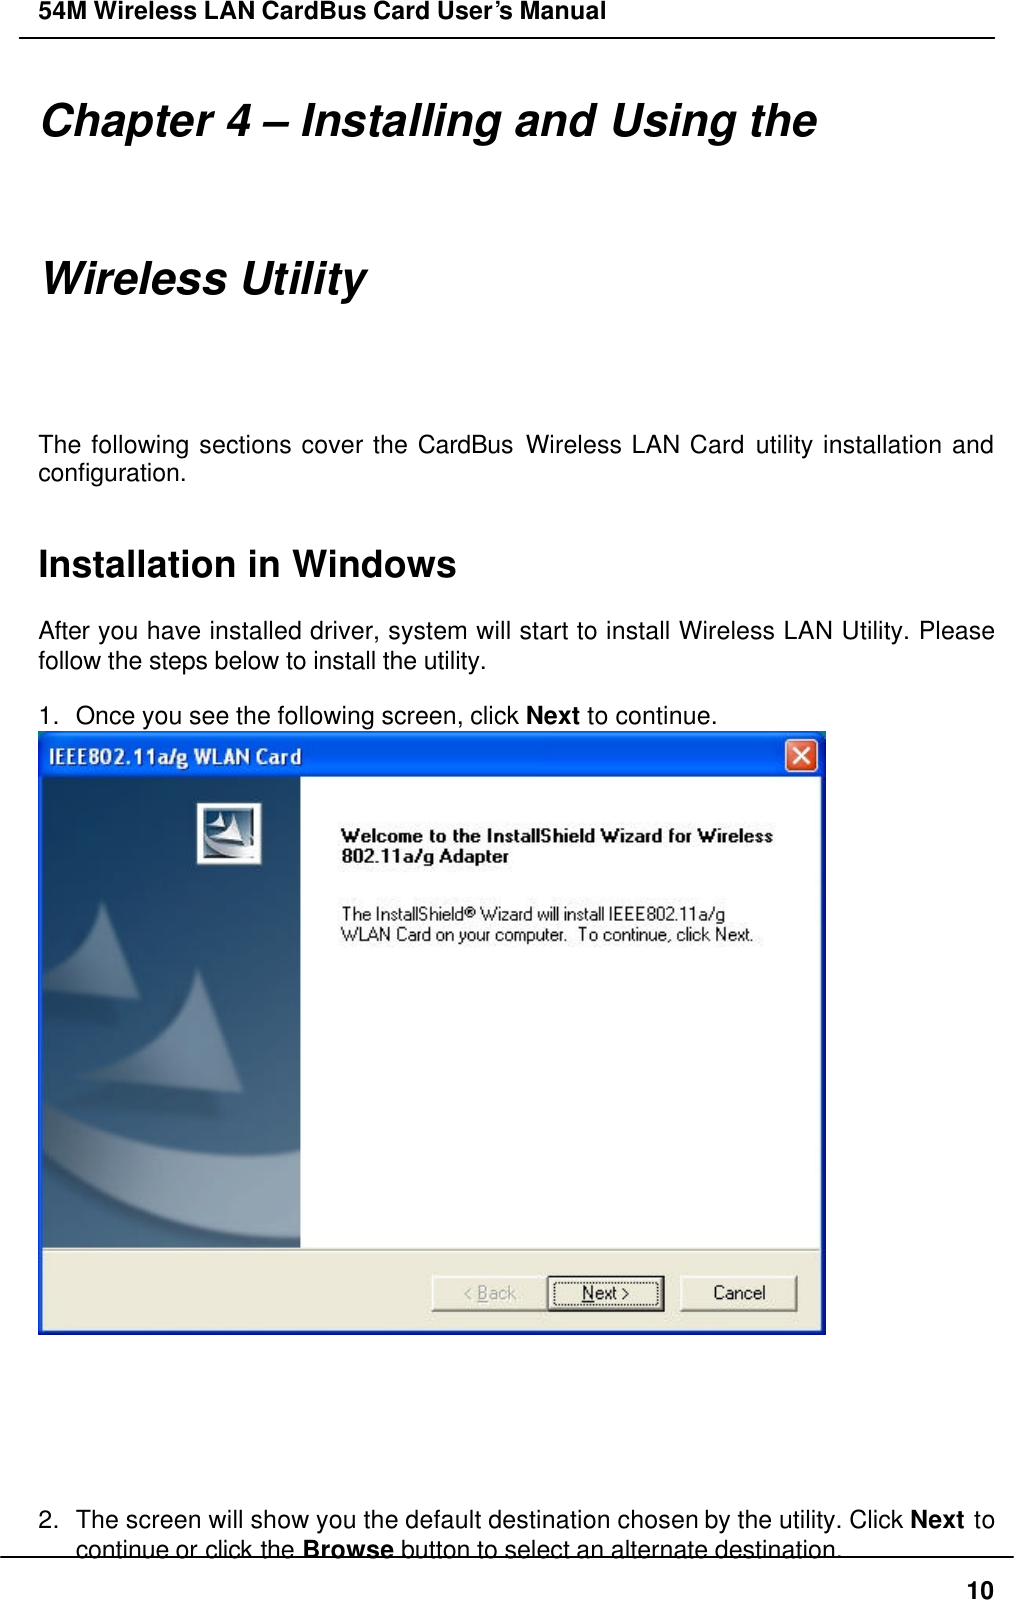 54M Wireless LAN CardBus Card User’s Manual  10 Chapter 4 – Installing and Using the Wireless Utility The following sections cover the CardBus Wireless LAN Card utility installation and configuration.   Installation in Windows  After you have installed driver, system will start to install Wireless LAN Utility. Please follow the steps below to install the utility.  1. Once you see the following screen, click Next to continue.        2. The screen will show you the default destination chosen by the utility. Click Next to continue or click the Browse button to select an alternate destination. 